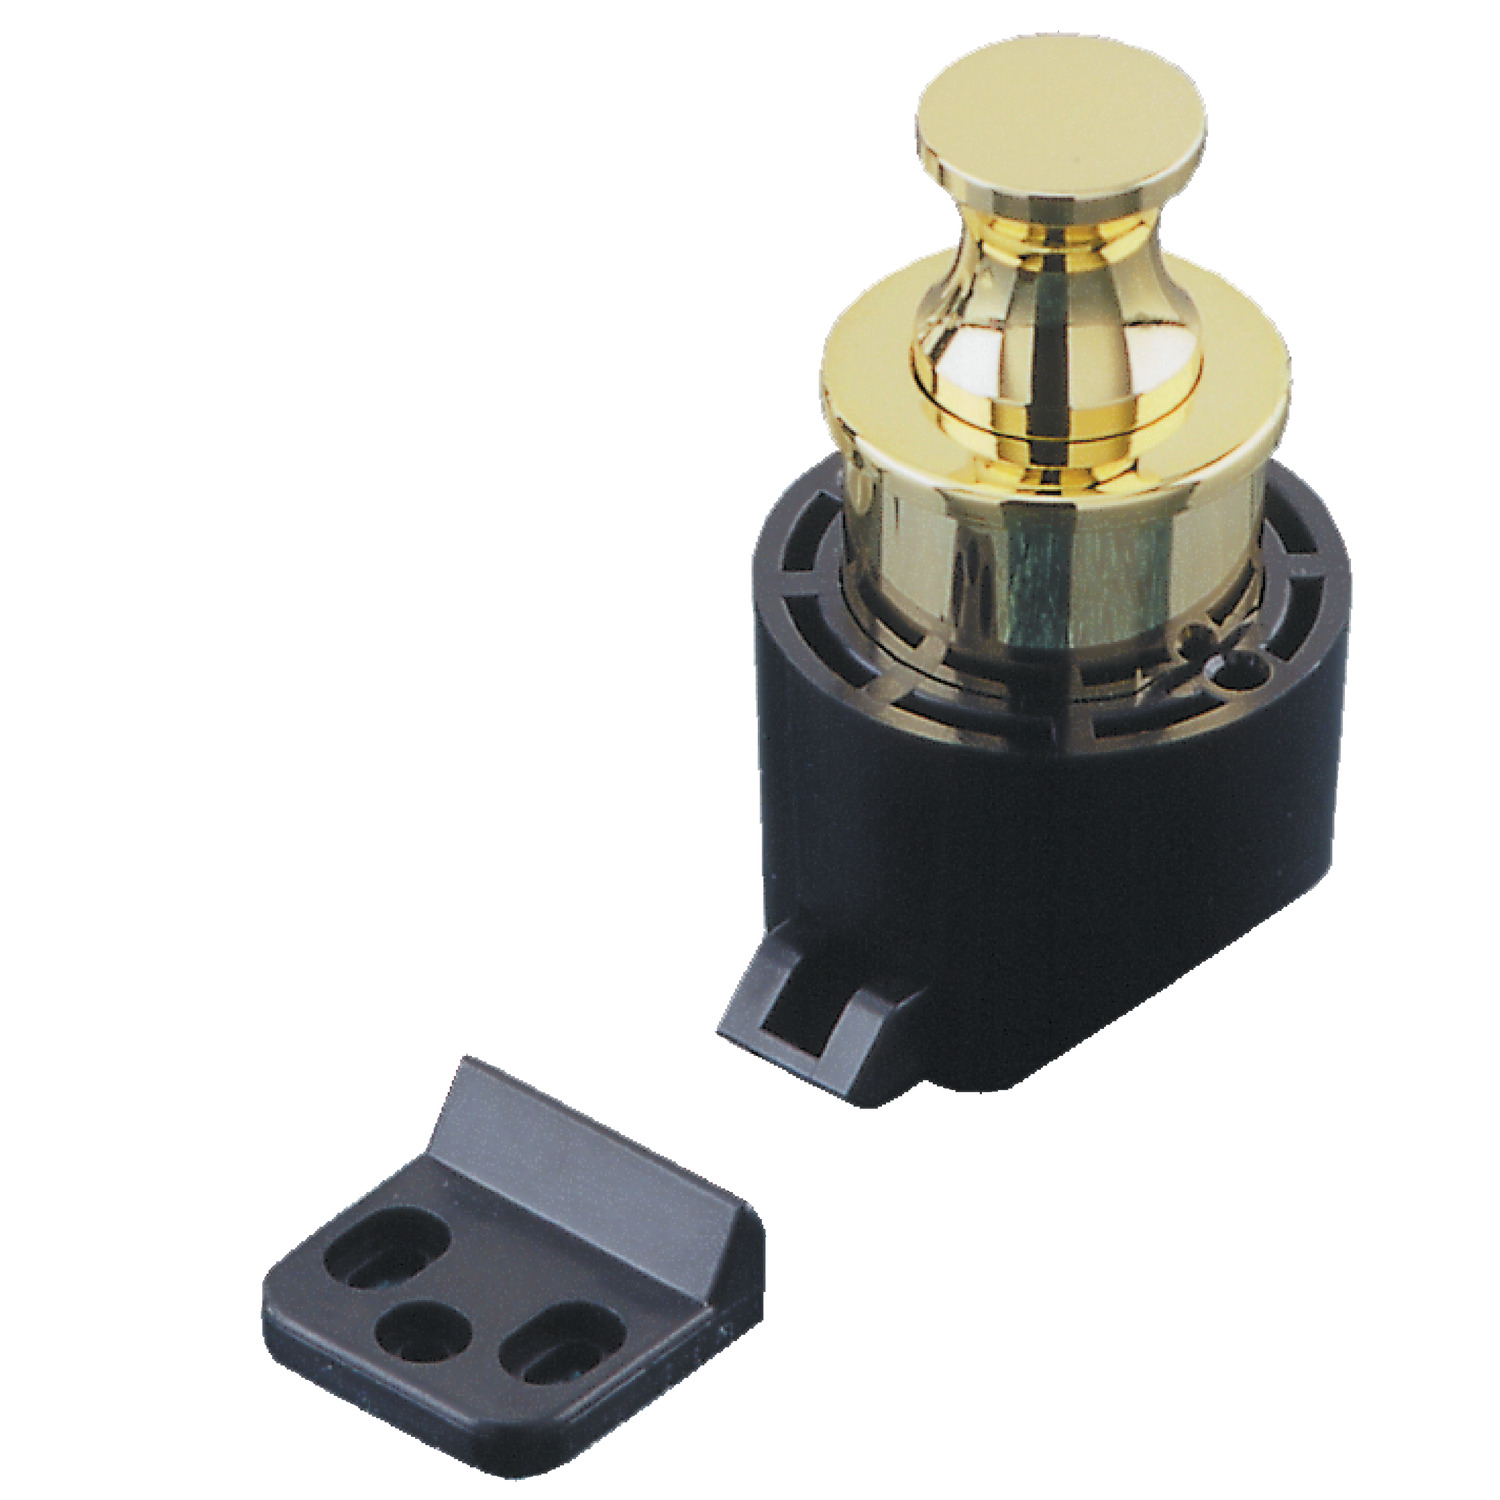 Push Knobs Push knobs with latch - For inset doors. Suitable for door/wall thicknesses of 15mm to 30mm.